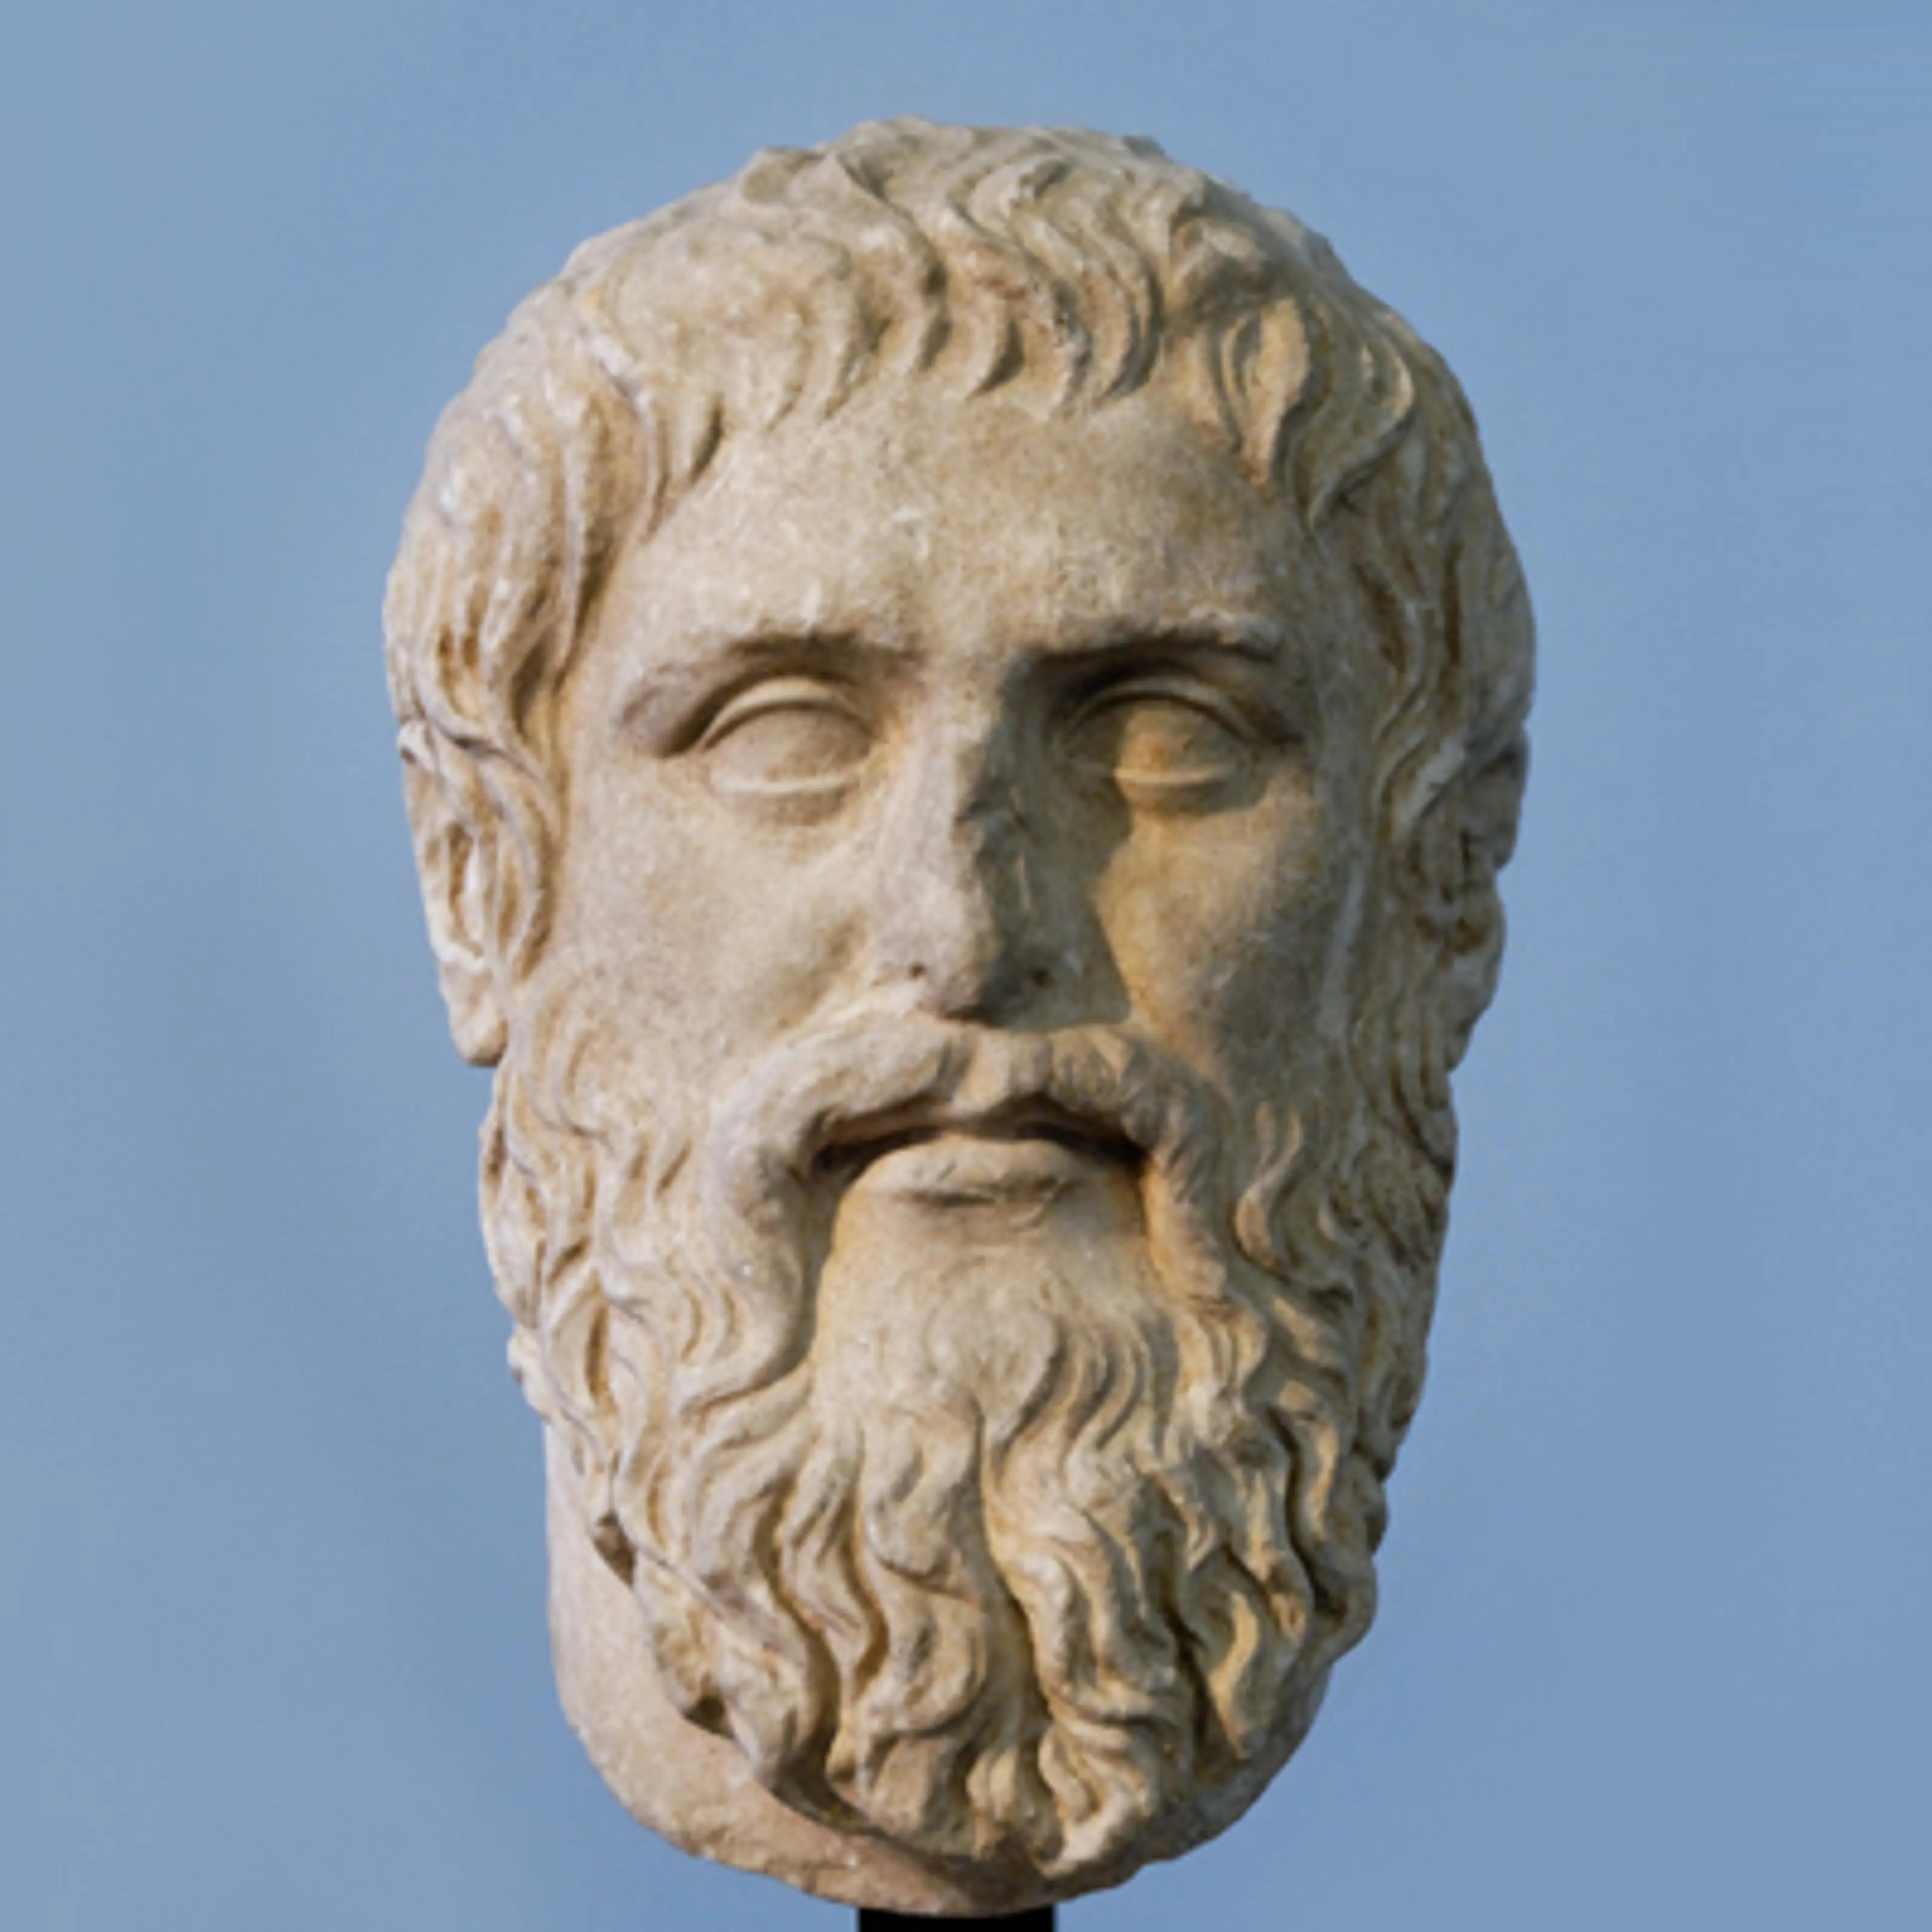 29 quotes from Plato, the Father of Western philosophy